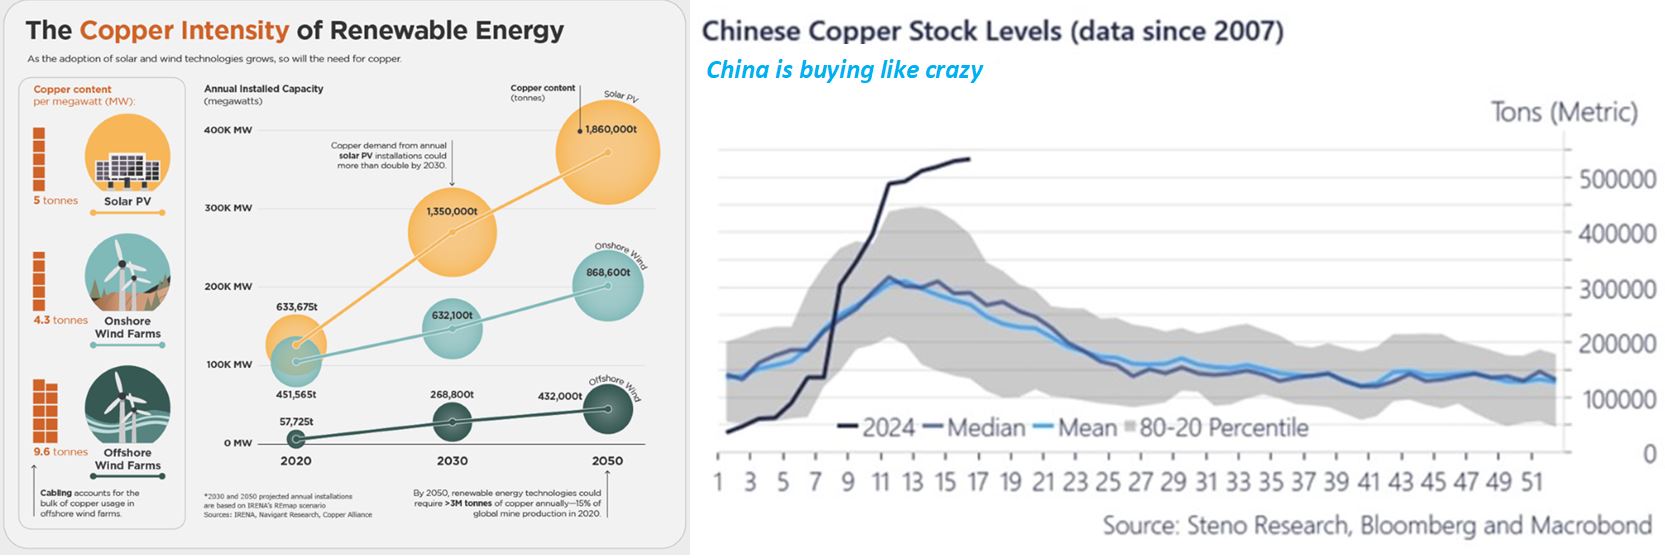 Chart 1: Copper intensity of renewablesChart 2: Chinese stockpiling this year